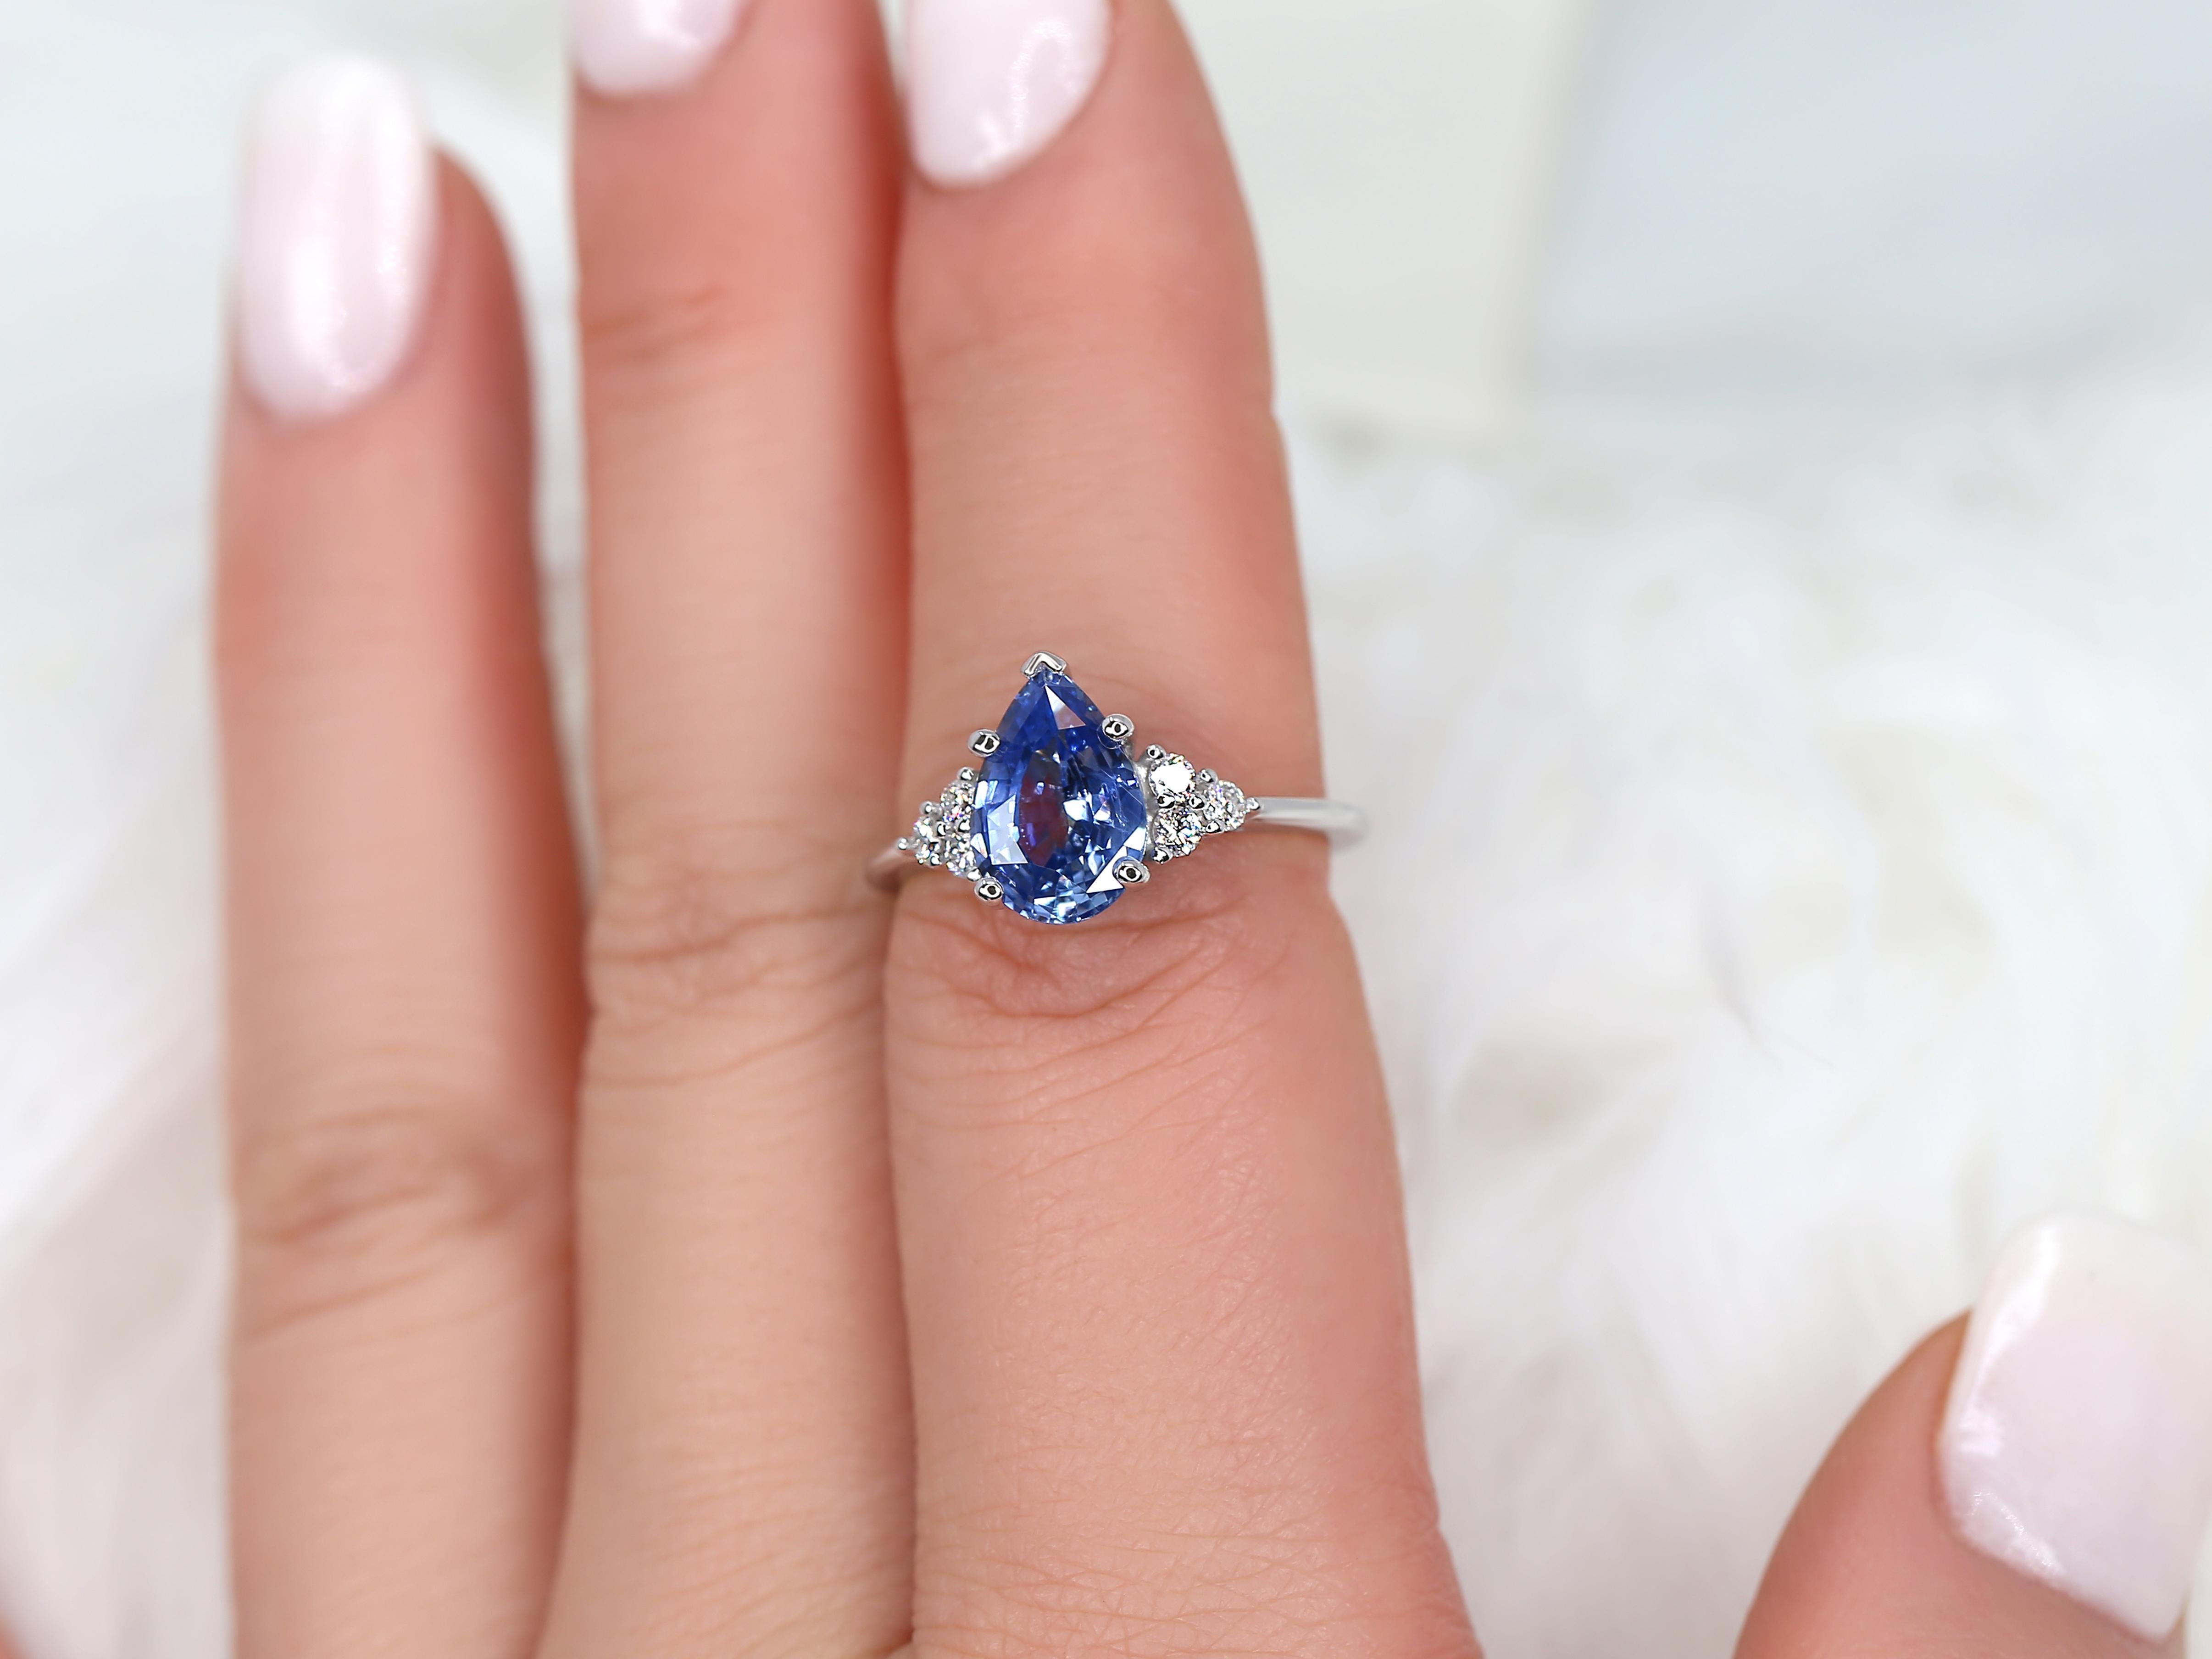 Enhance your look with our stunning Juliet pear-cut cornflower blue sapphire cluster ring, meticulously crafted in 14kt white gold. Featuring sparkling side stone diamonds, this elegant ring adds a touch of sophistication and allure to your